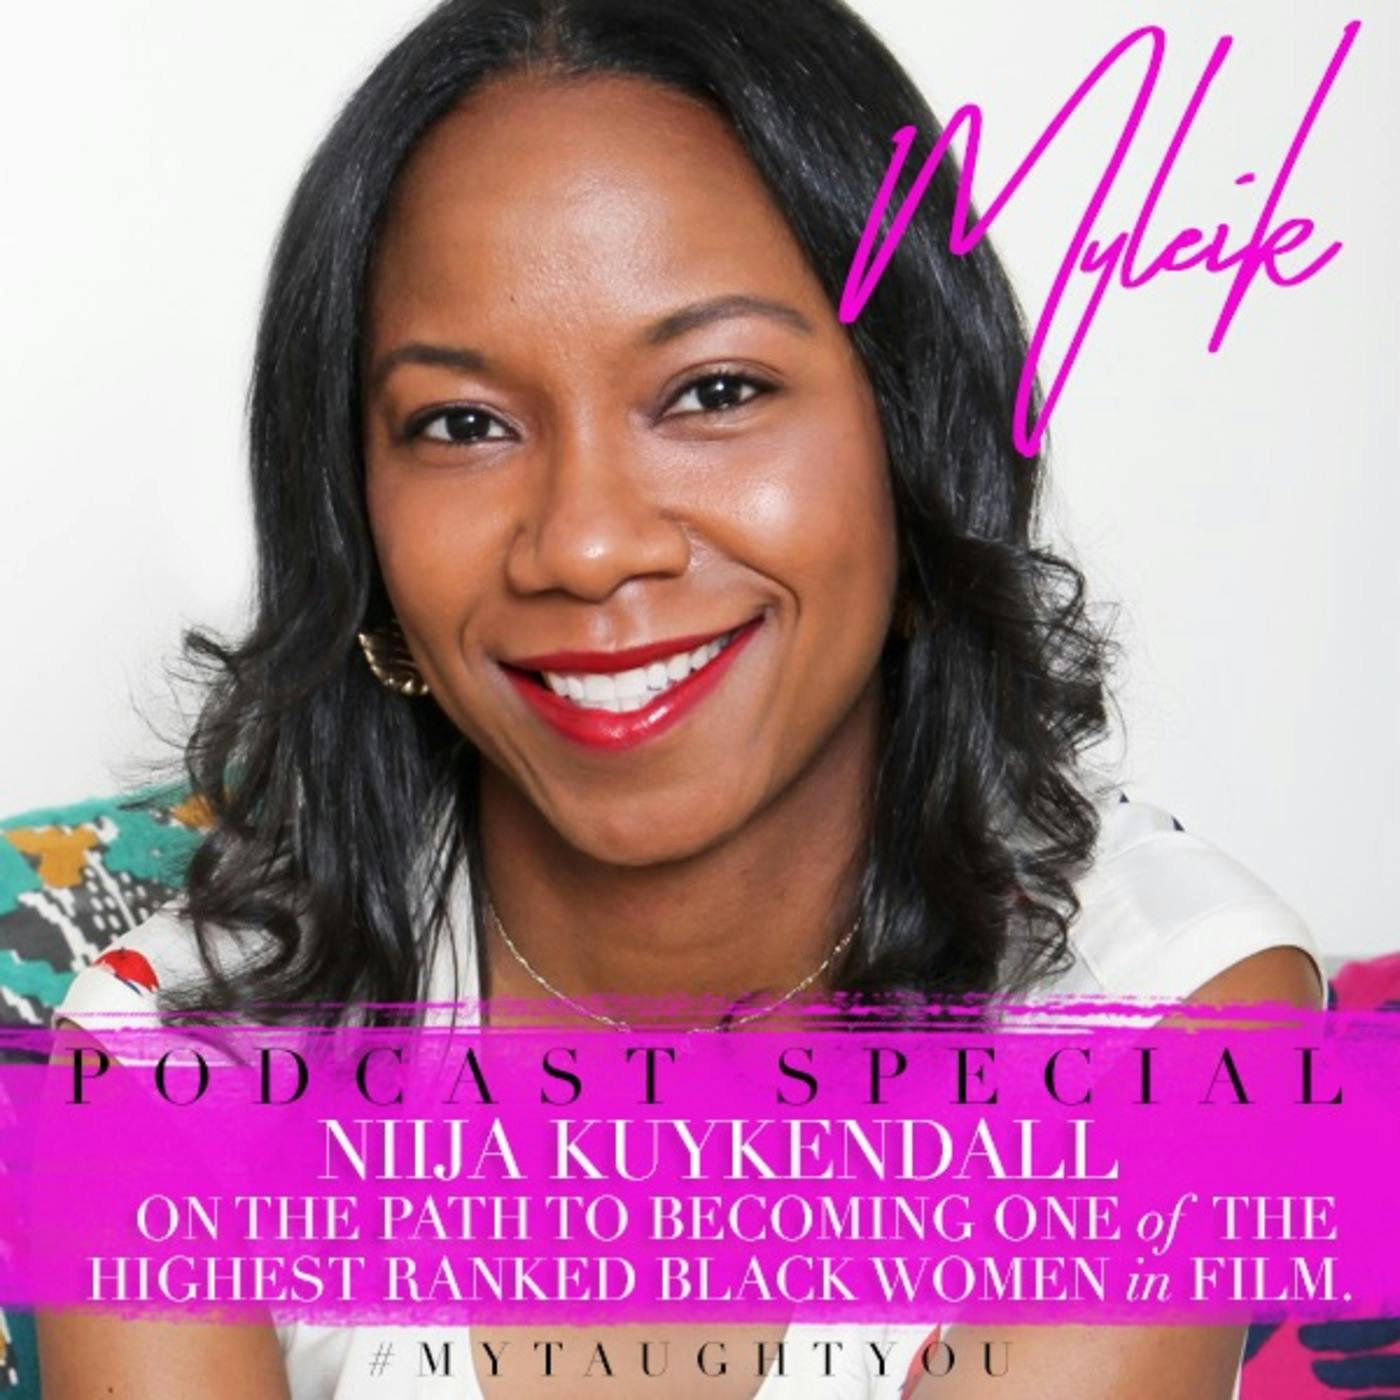 Thumbnail for "127: Becoming One Of The Highest Ranked Black Women in Film: Niija Kuykendall".